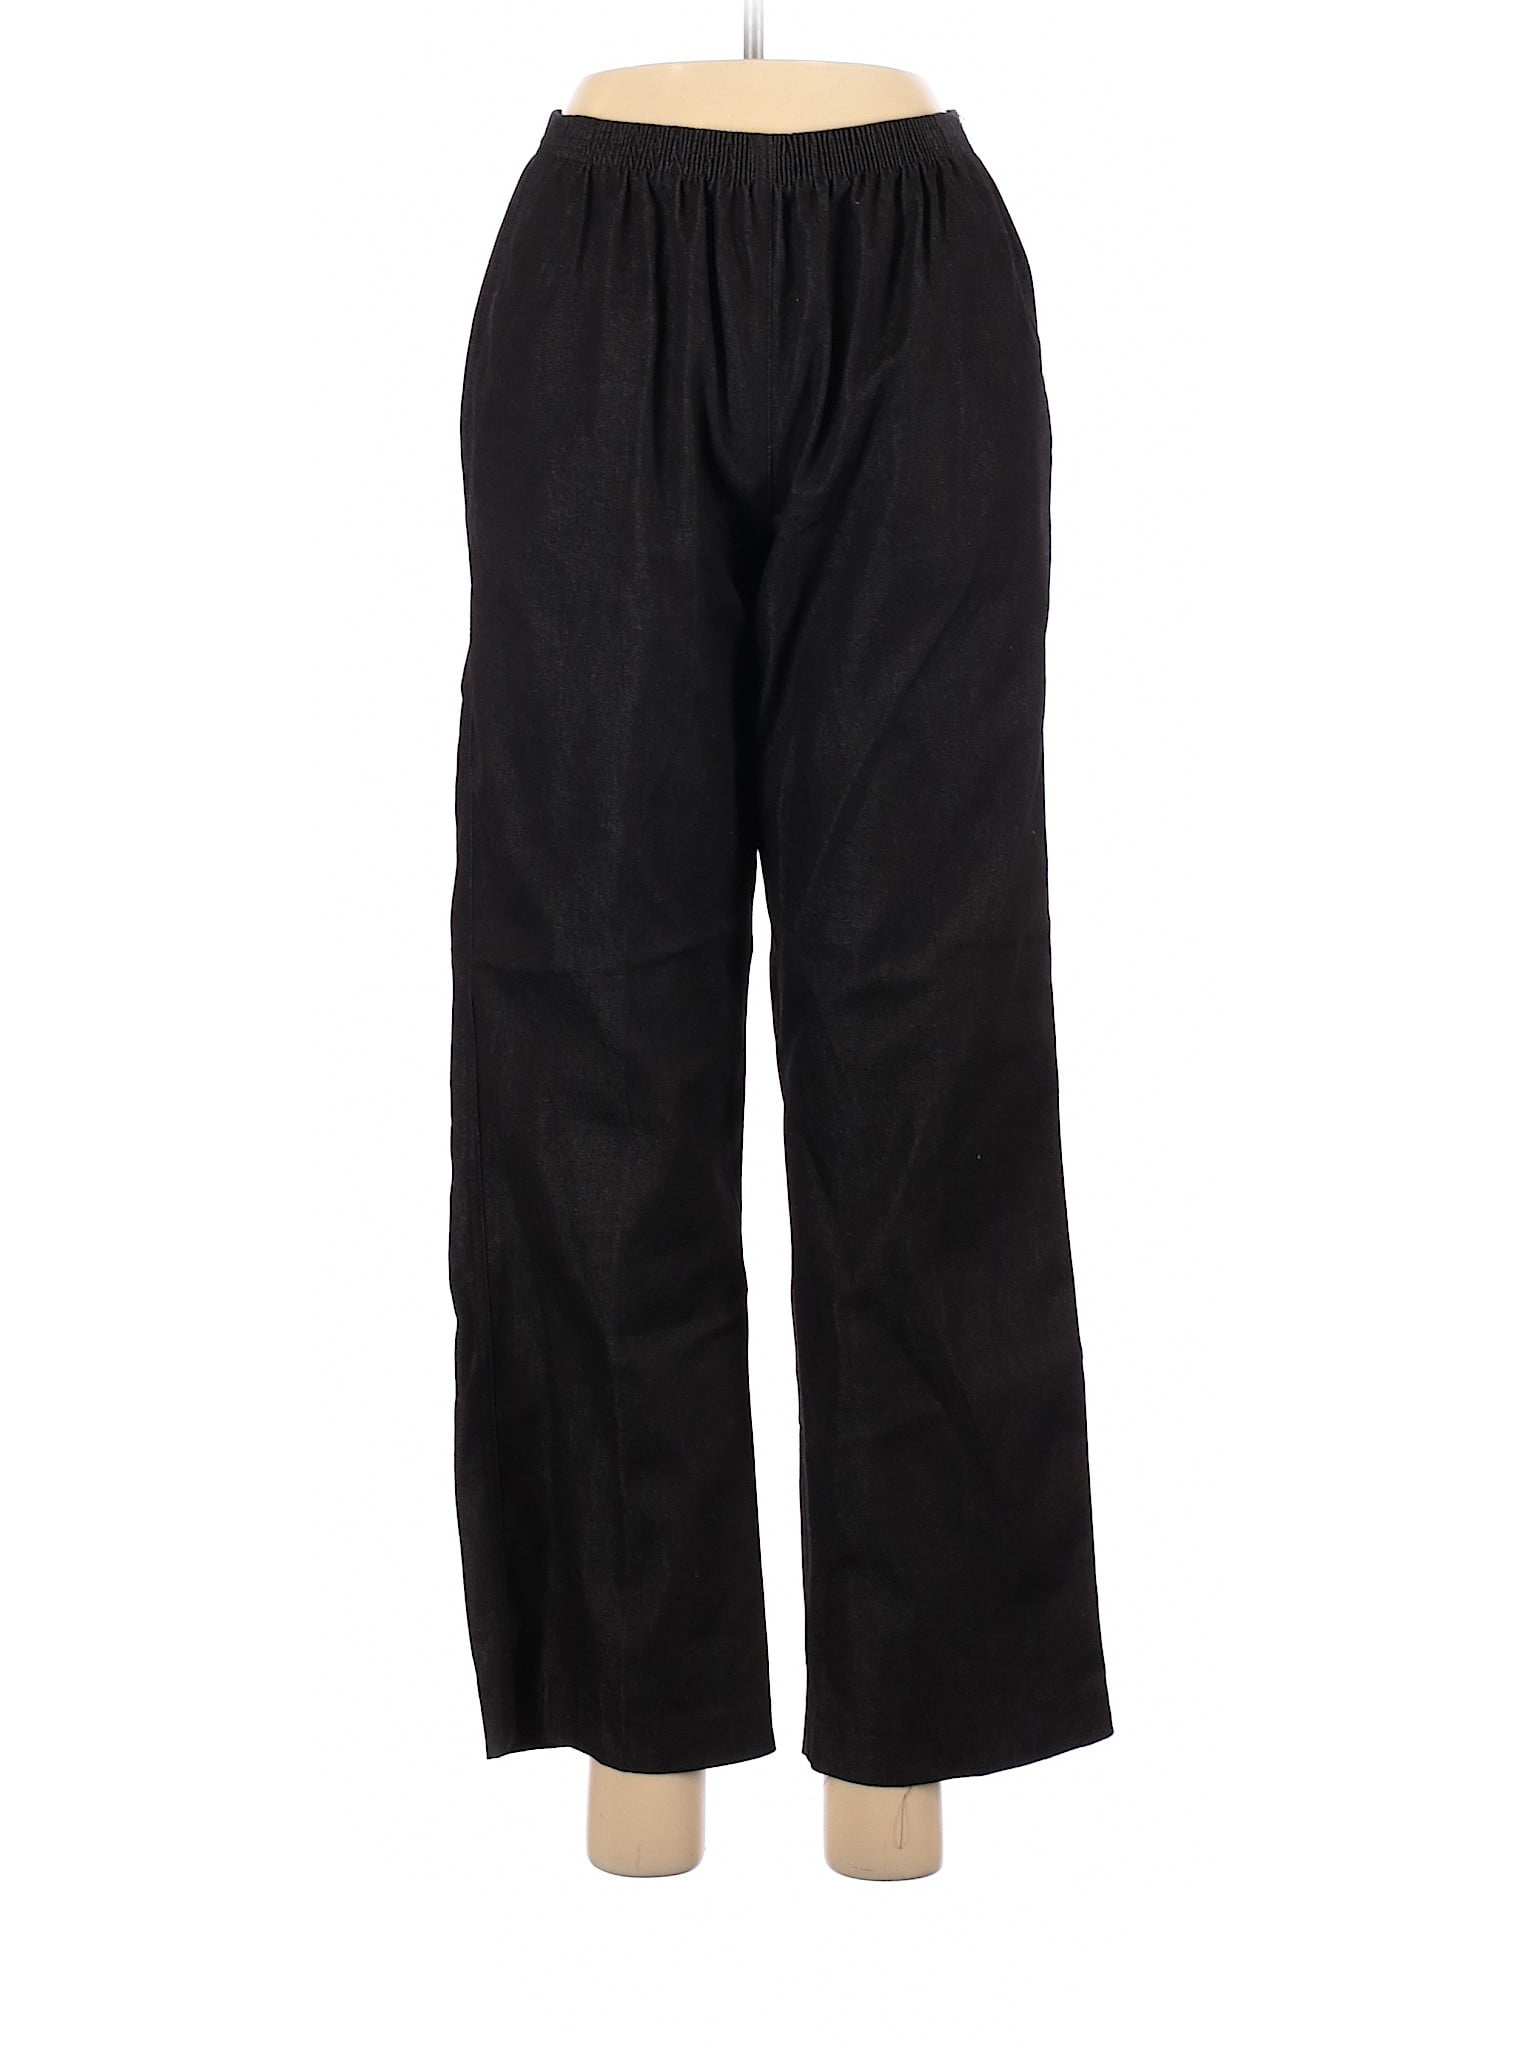 Alfred Dunner - Pre-Owned Alfred Dunner Women's Size 8 Dress Pants ...